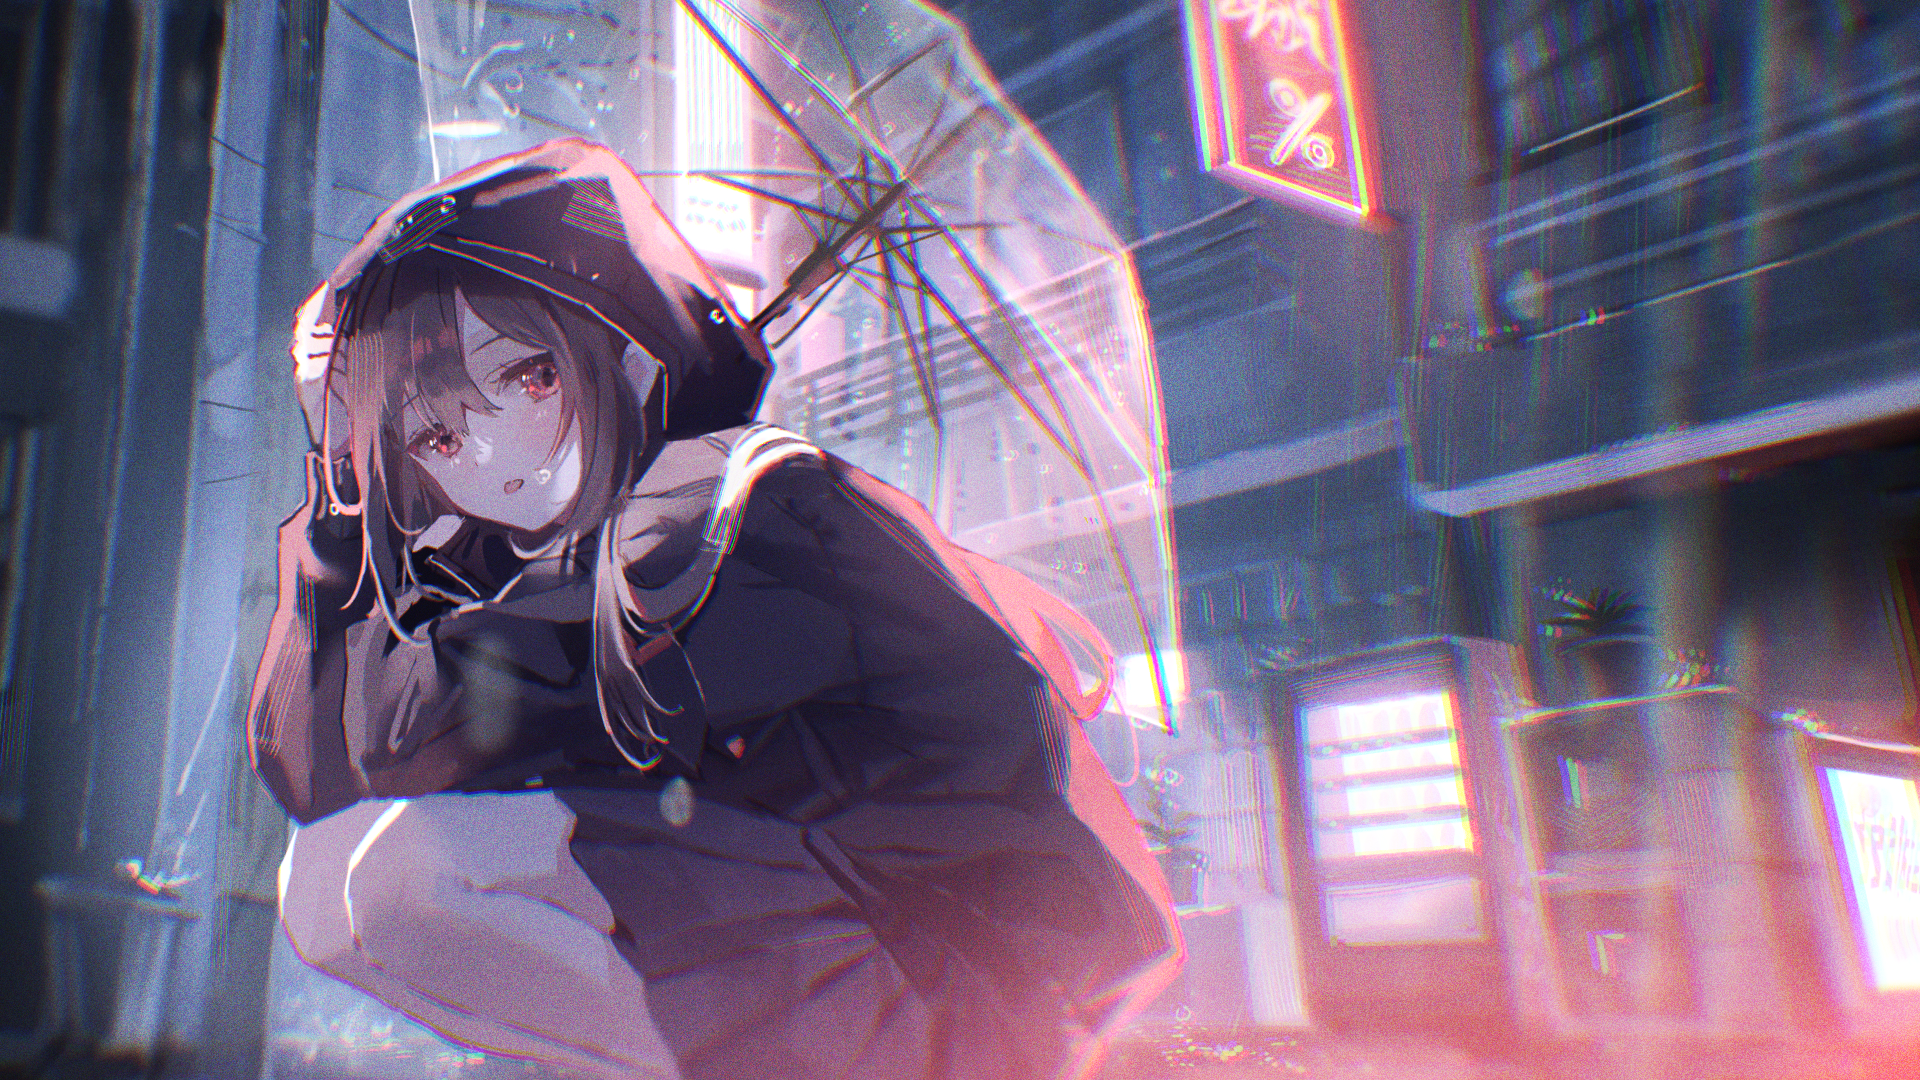 Best Anime Wallpapers for Wallpaper Engine in 2022 — Yandex video arama